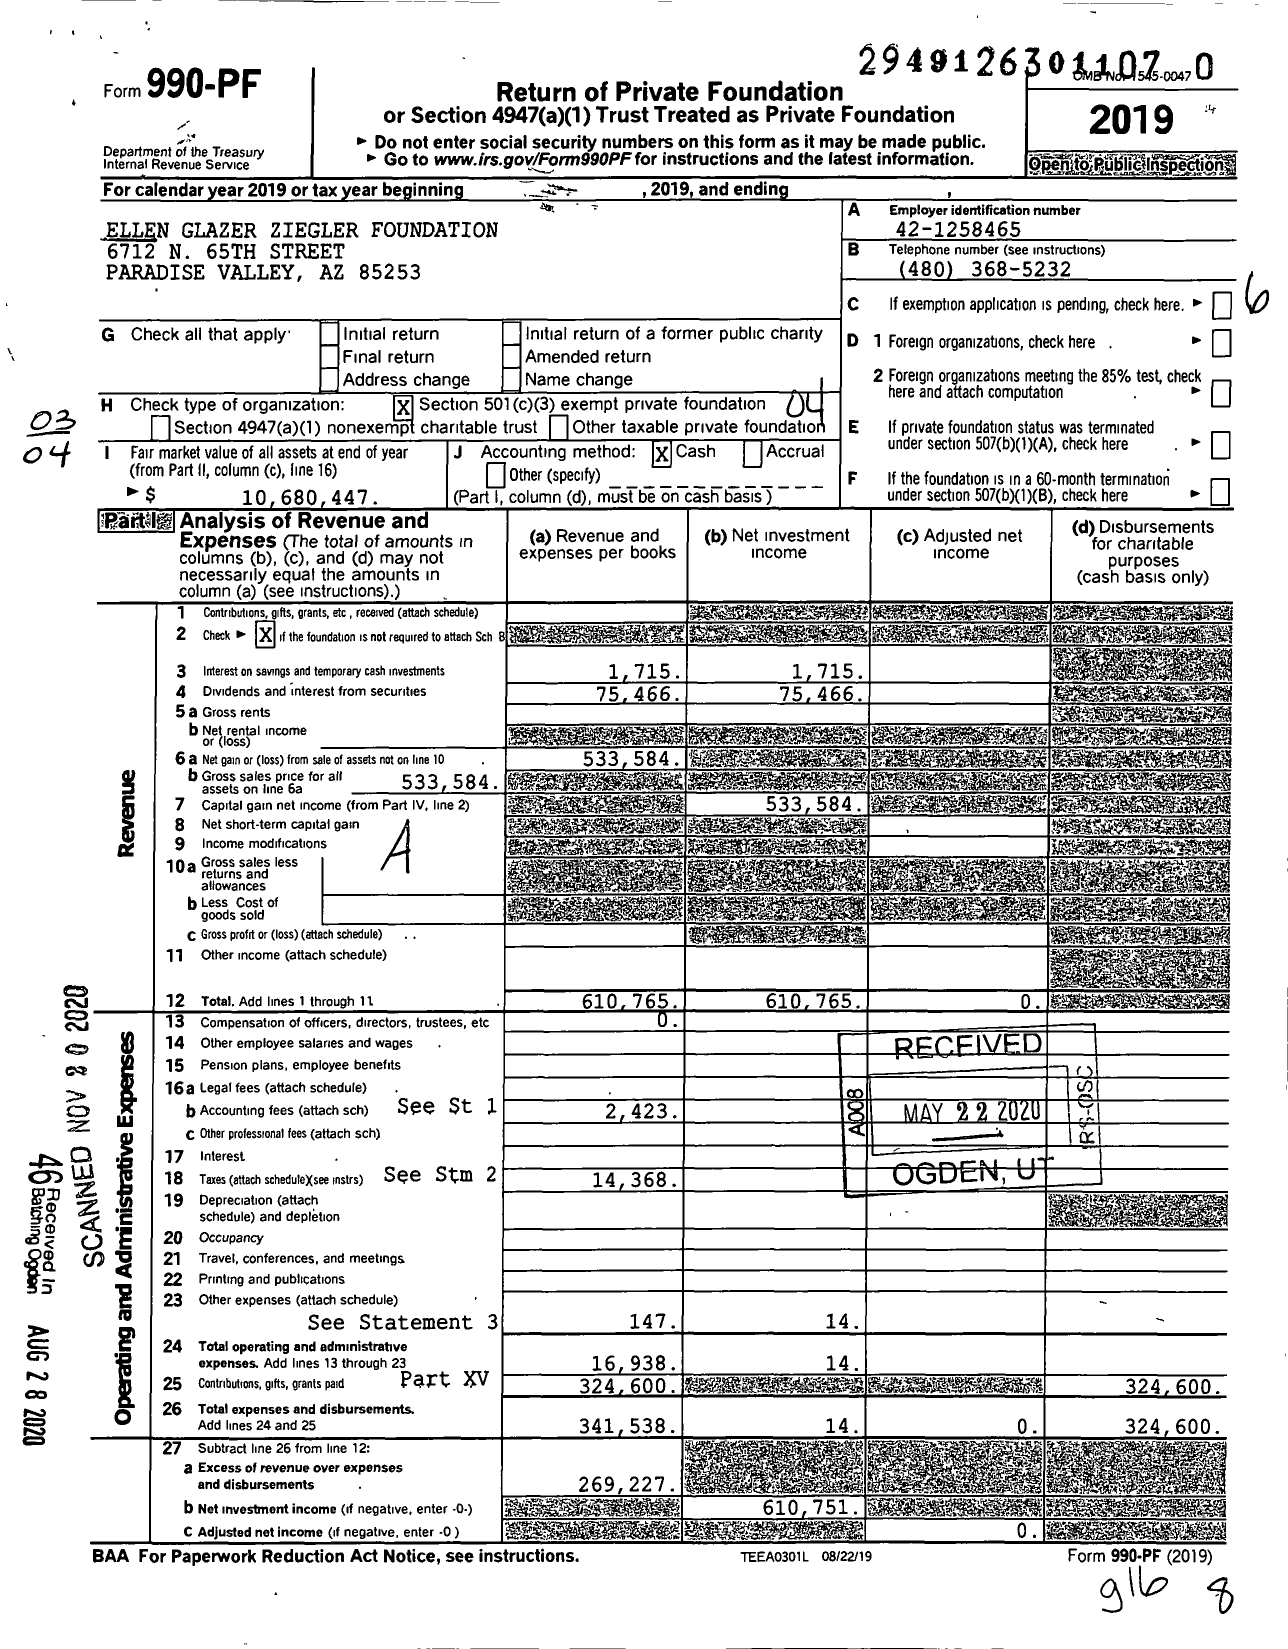 Image of first page of 2019 Form 990PF for Ellen Glazer Ziegler Foundation